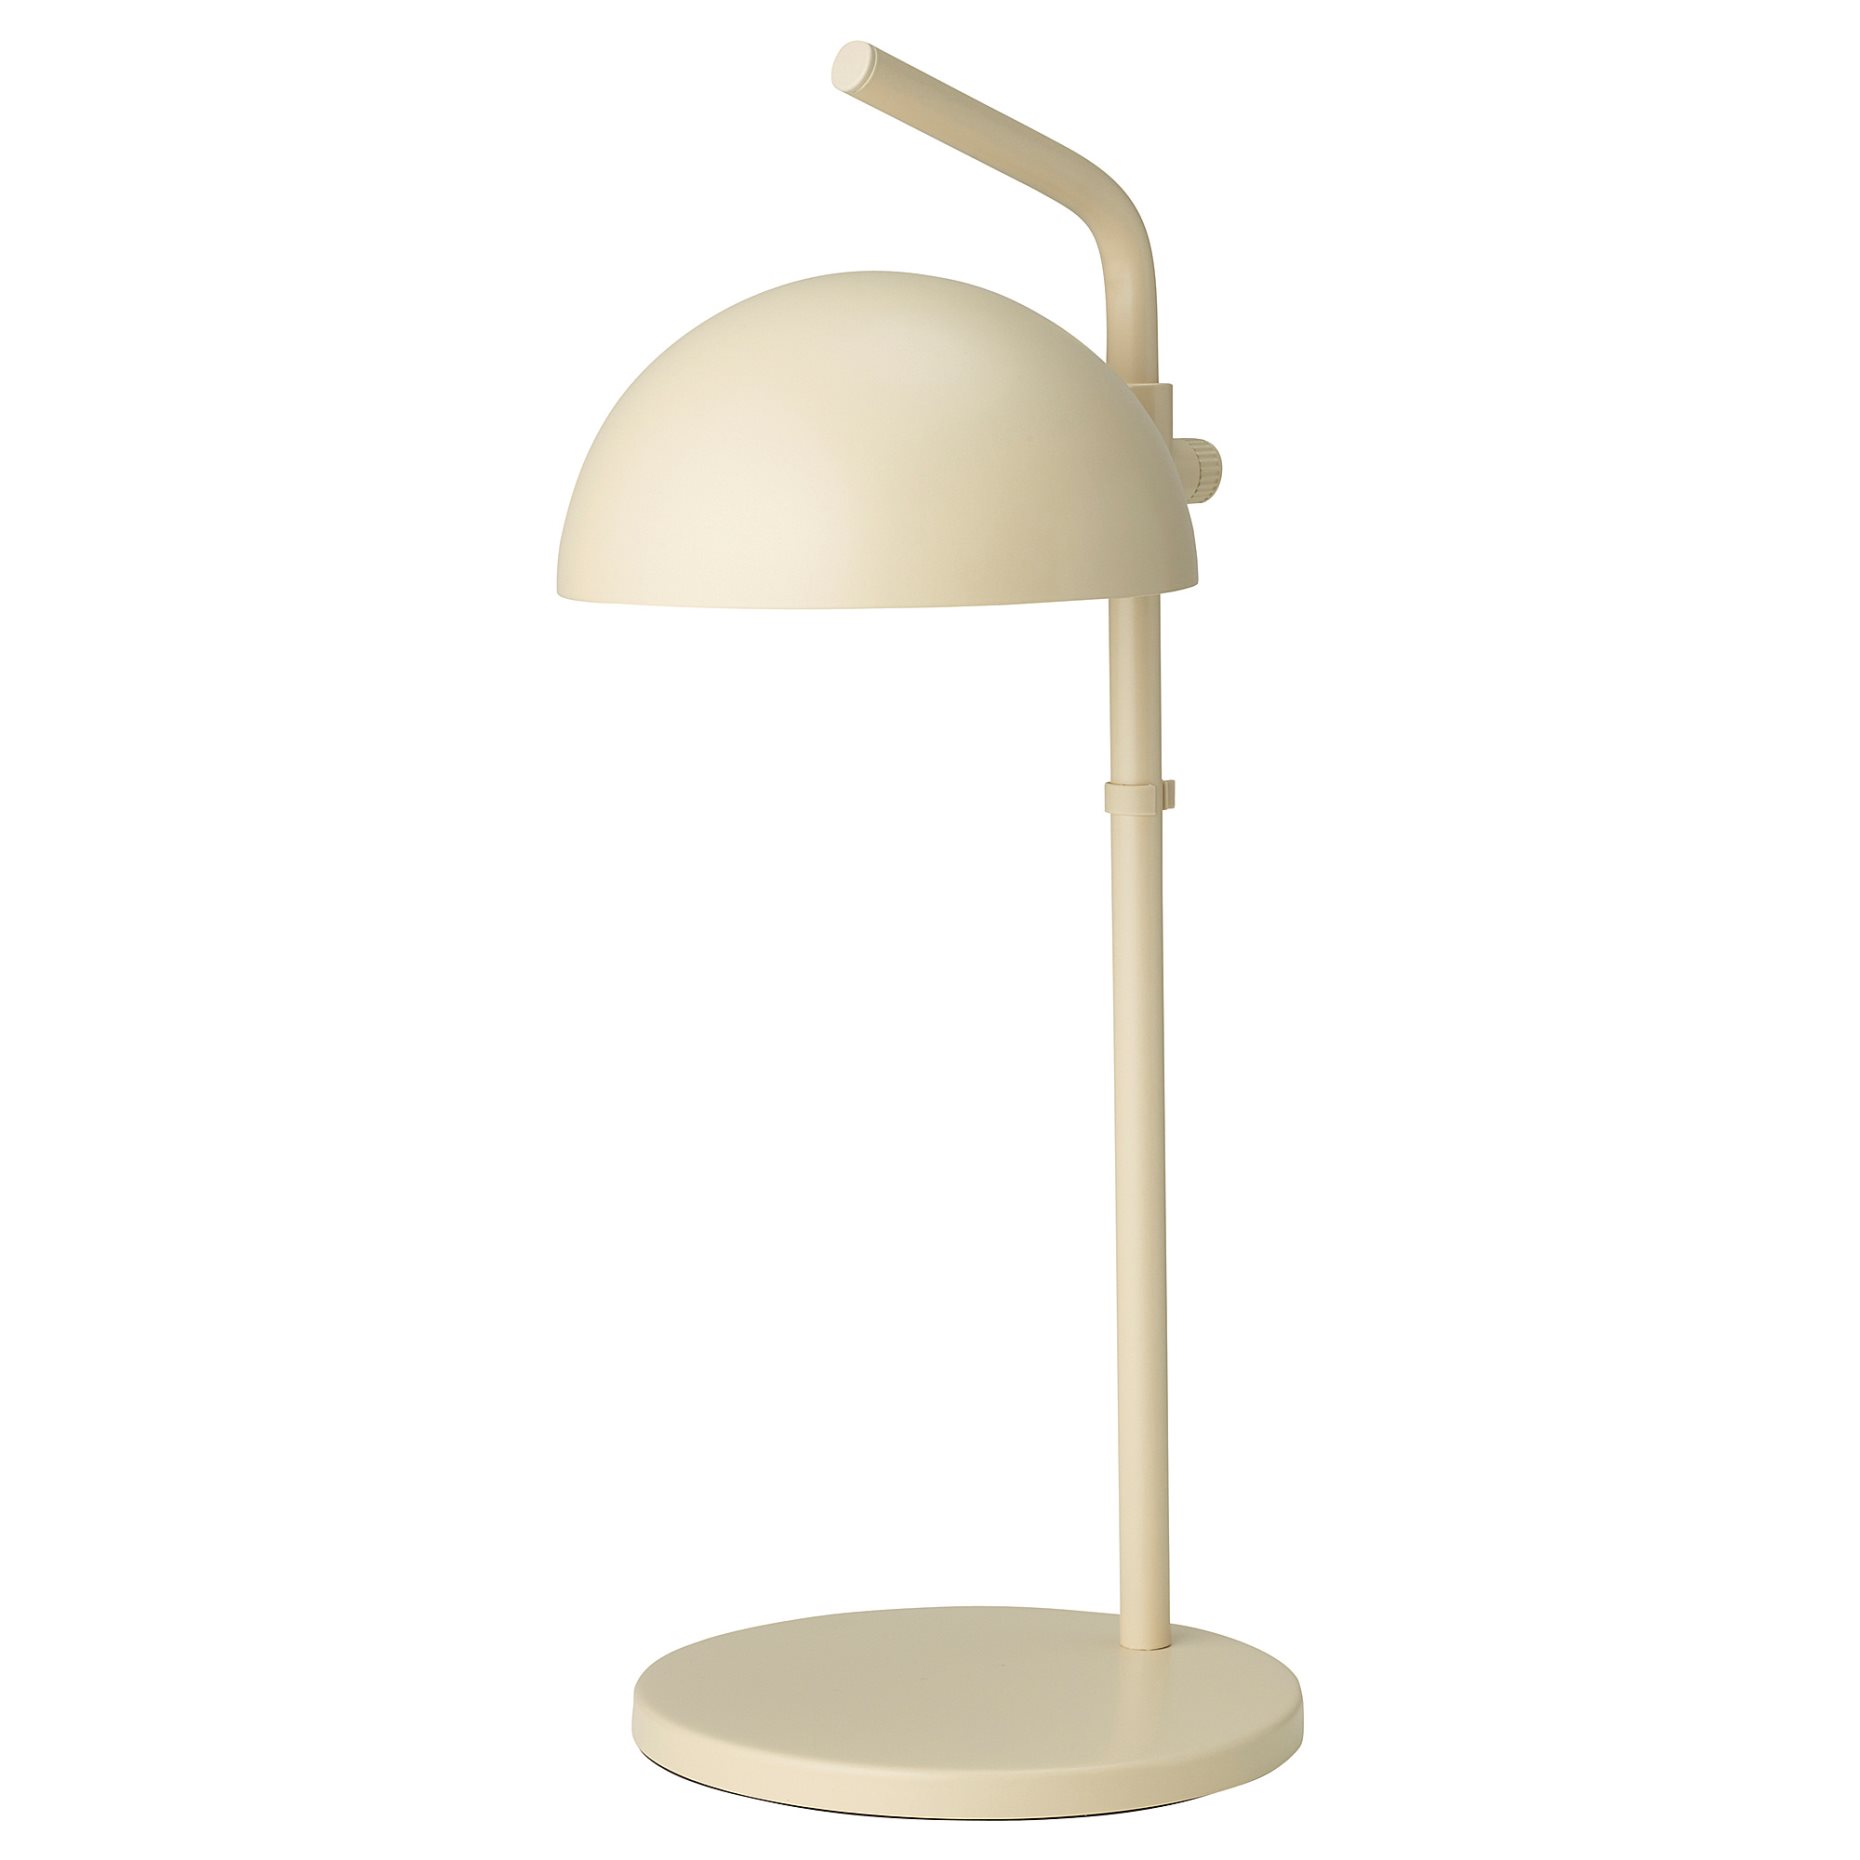 SOMMARLÅNKE, decorative table lamp with built-in LED light source/outdoor/battery-operated, 45 cm, 405.443.25